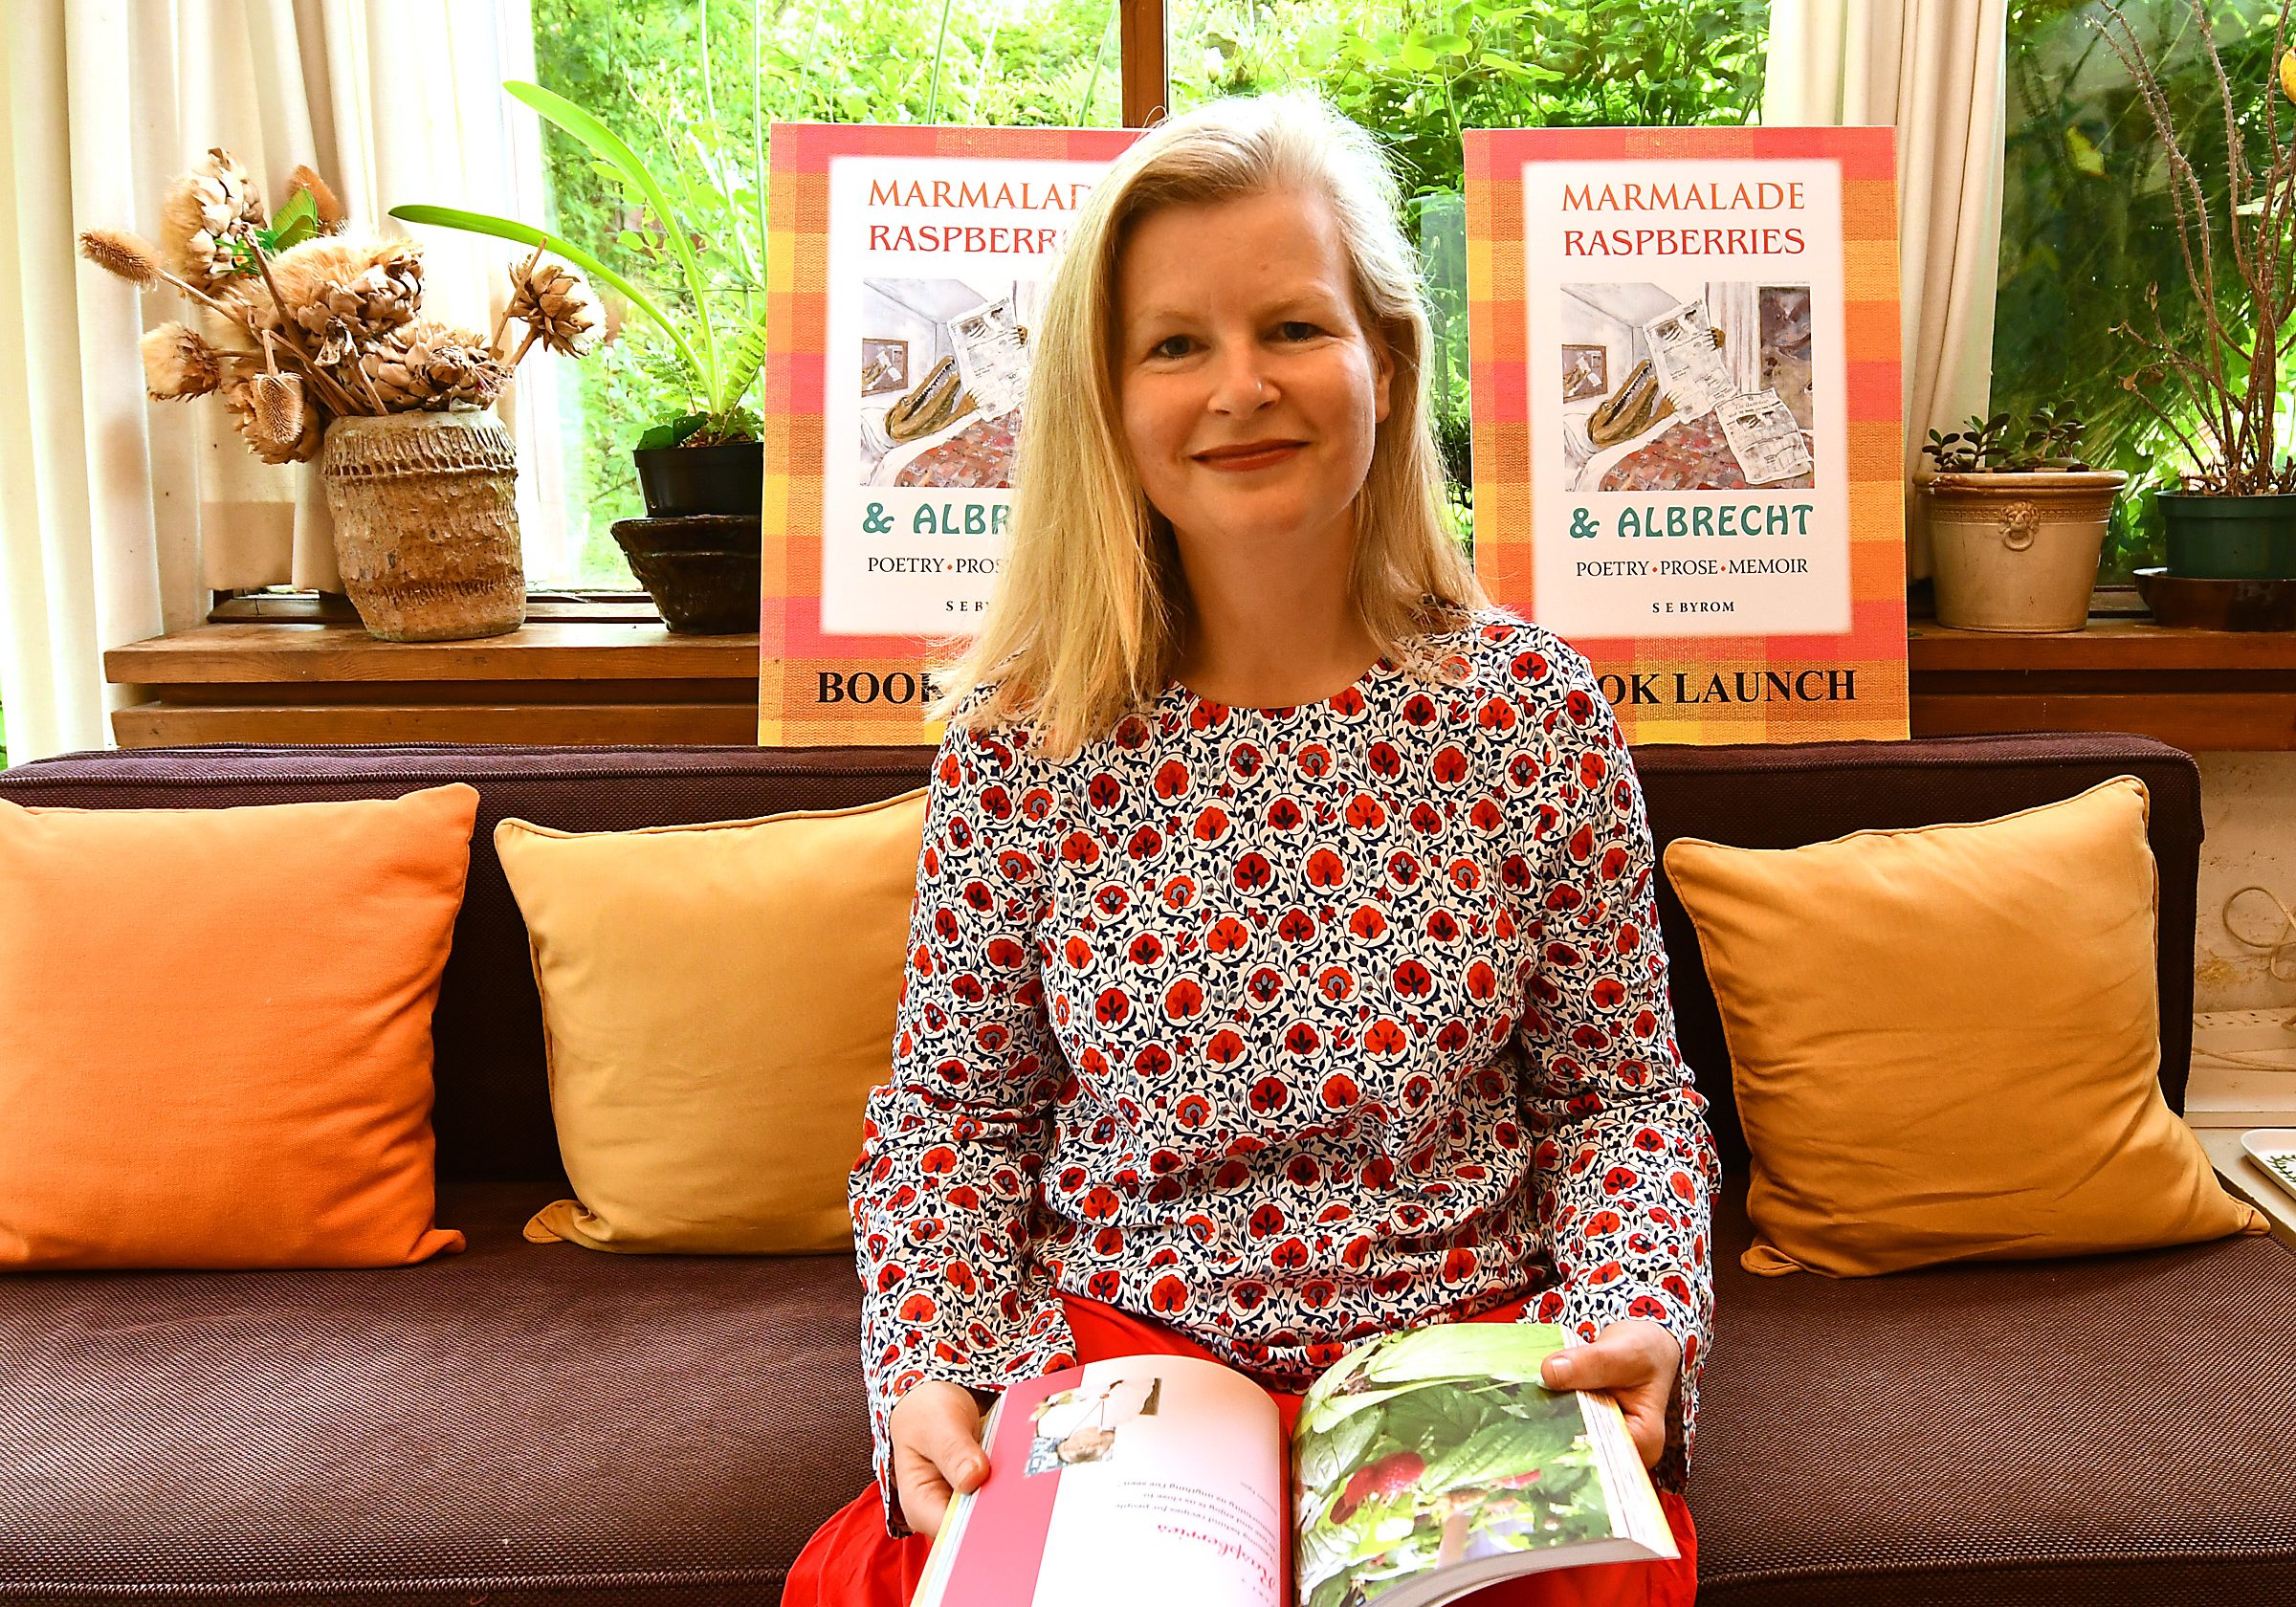 Author-Sarah-Byrom-holding-book-in-home-14q8on99o